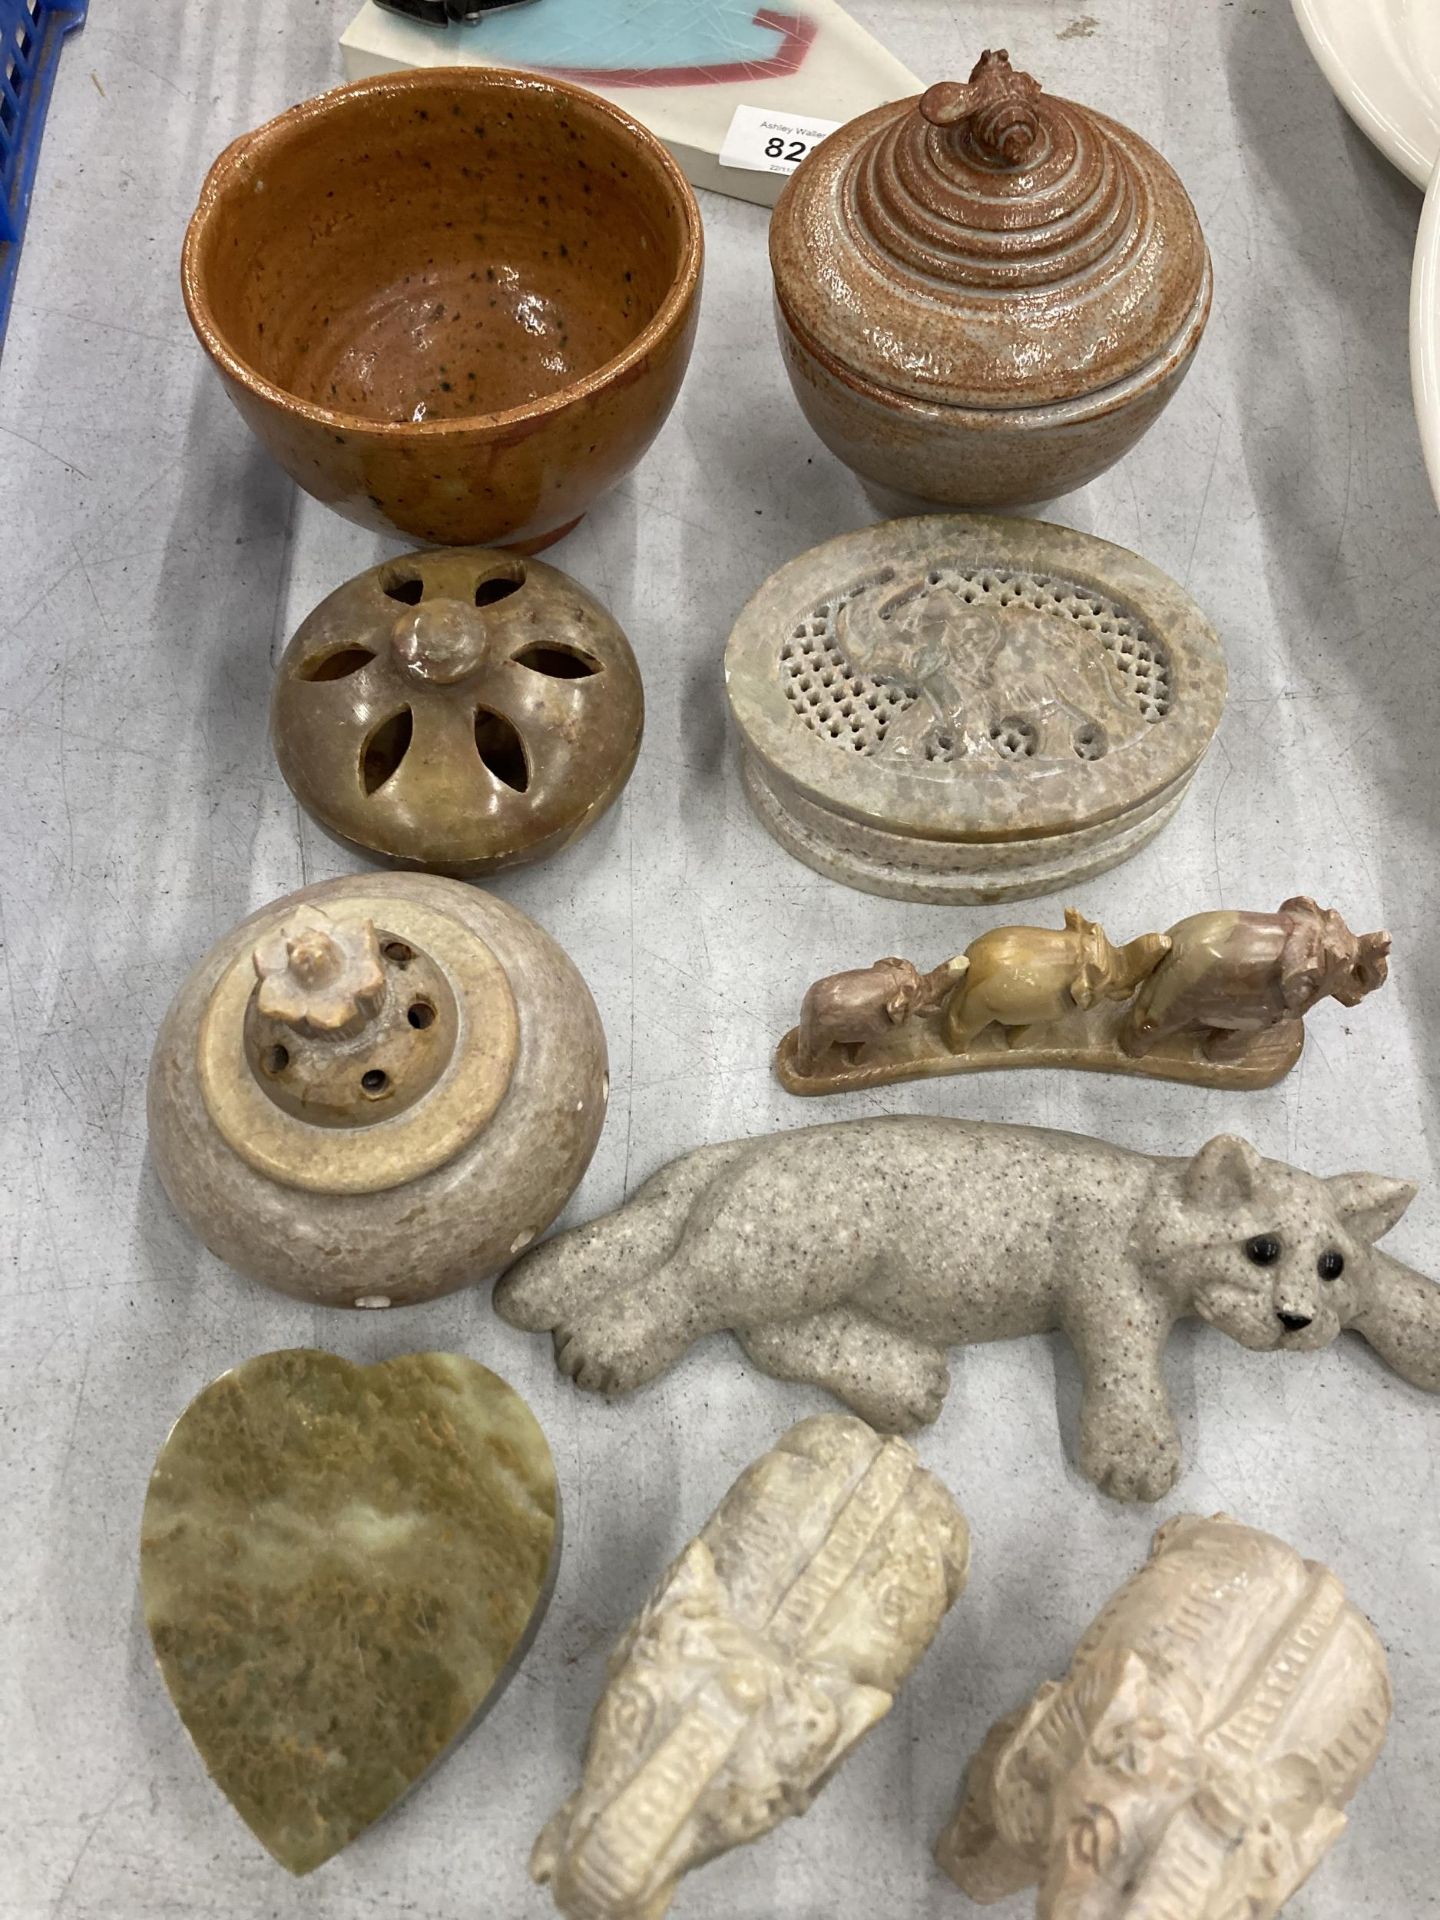 A COLLECTION OF STONEWARE ITEMS TO INCLUDE ELEPHANTS, CATS, TRINKET DISHES, LIDDED POTS, ETC - Image 3 of 4